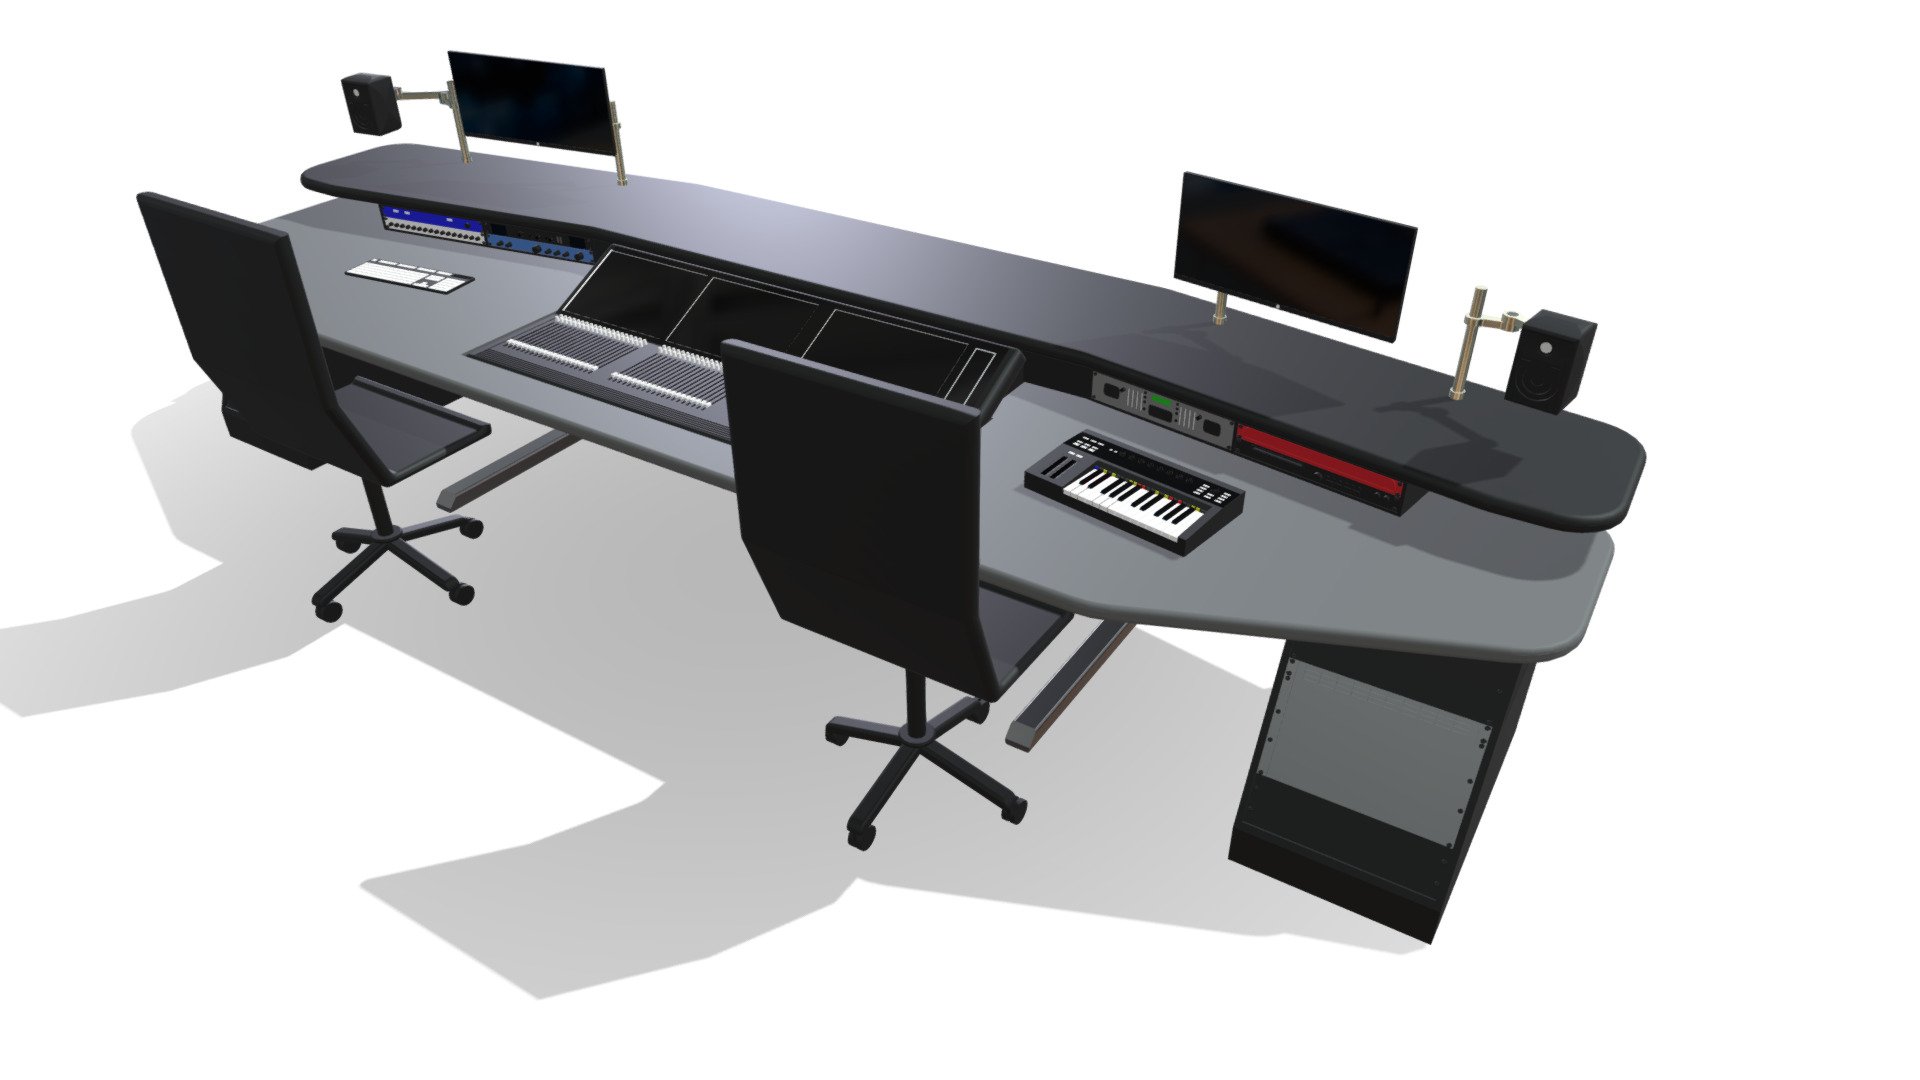 Audio studio production desk

Includes mixer and various equipments, modelled to scale in solidworks.
No imported textures or mapping included.

Last updated 16/03/2018 - Audio Production Desk - Buy Royalty Free 3D model by cavicom (@ASI) 3d model